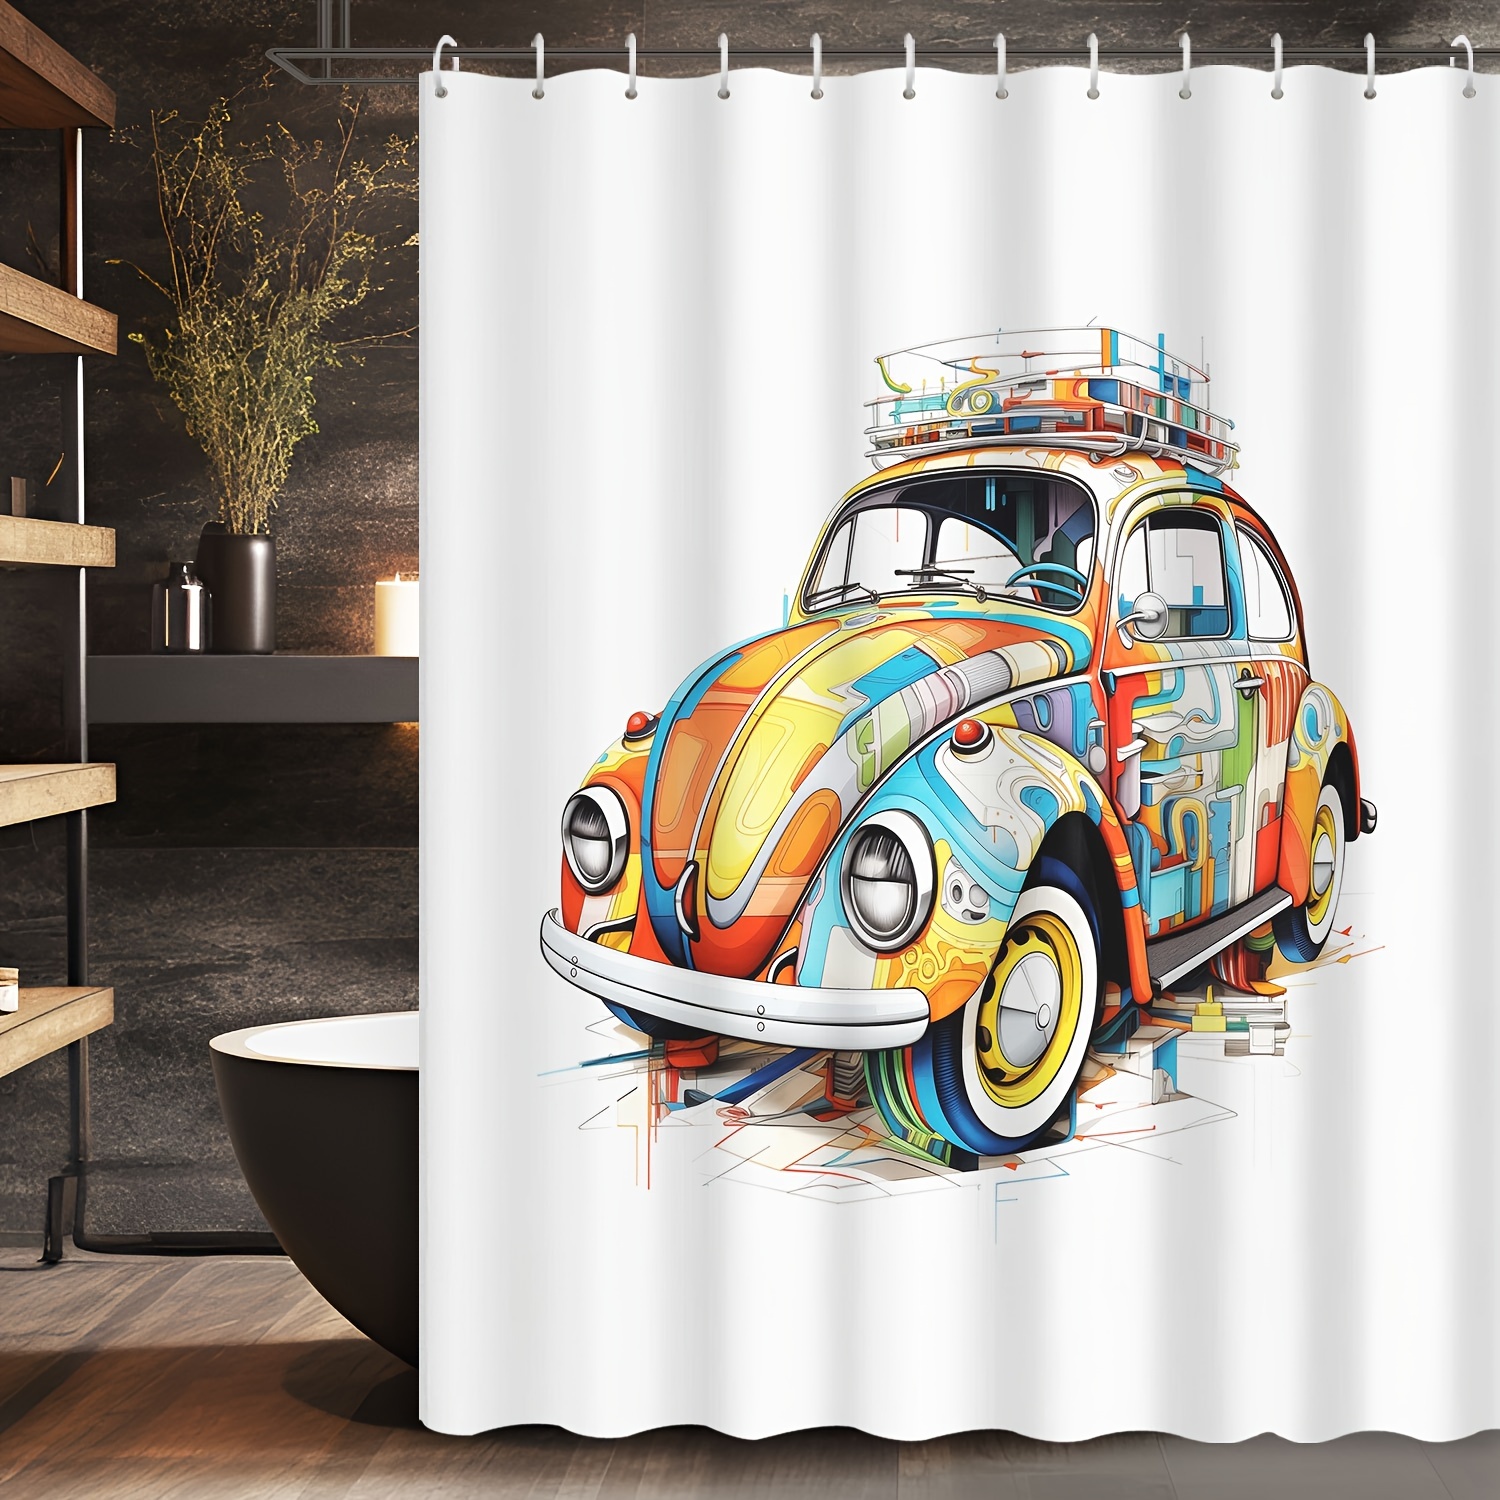 

Vintage Cartoon Car Printed Shower Curtain, 72x72 Inch Water-resistant Polyester Bathroom Decor With Grommet Top, Machine Washable, Includes Hooks, Multi-color Graffiti Antique Vehicle Design